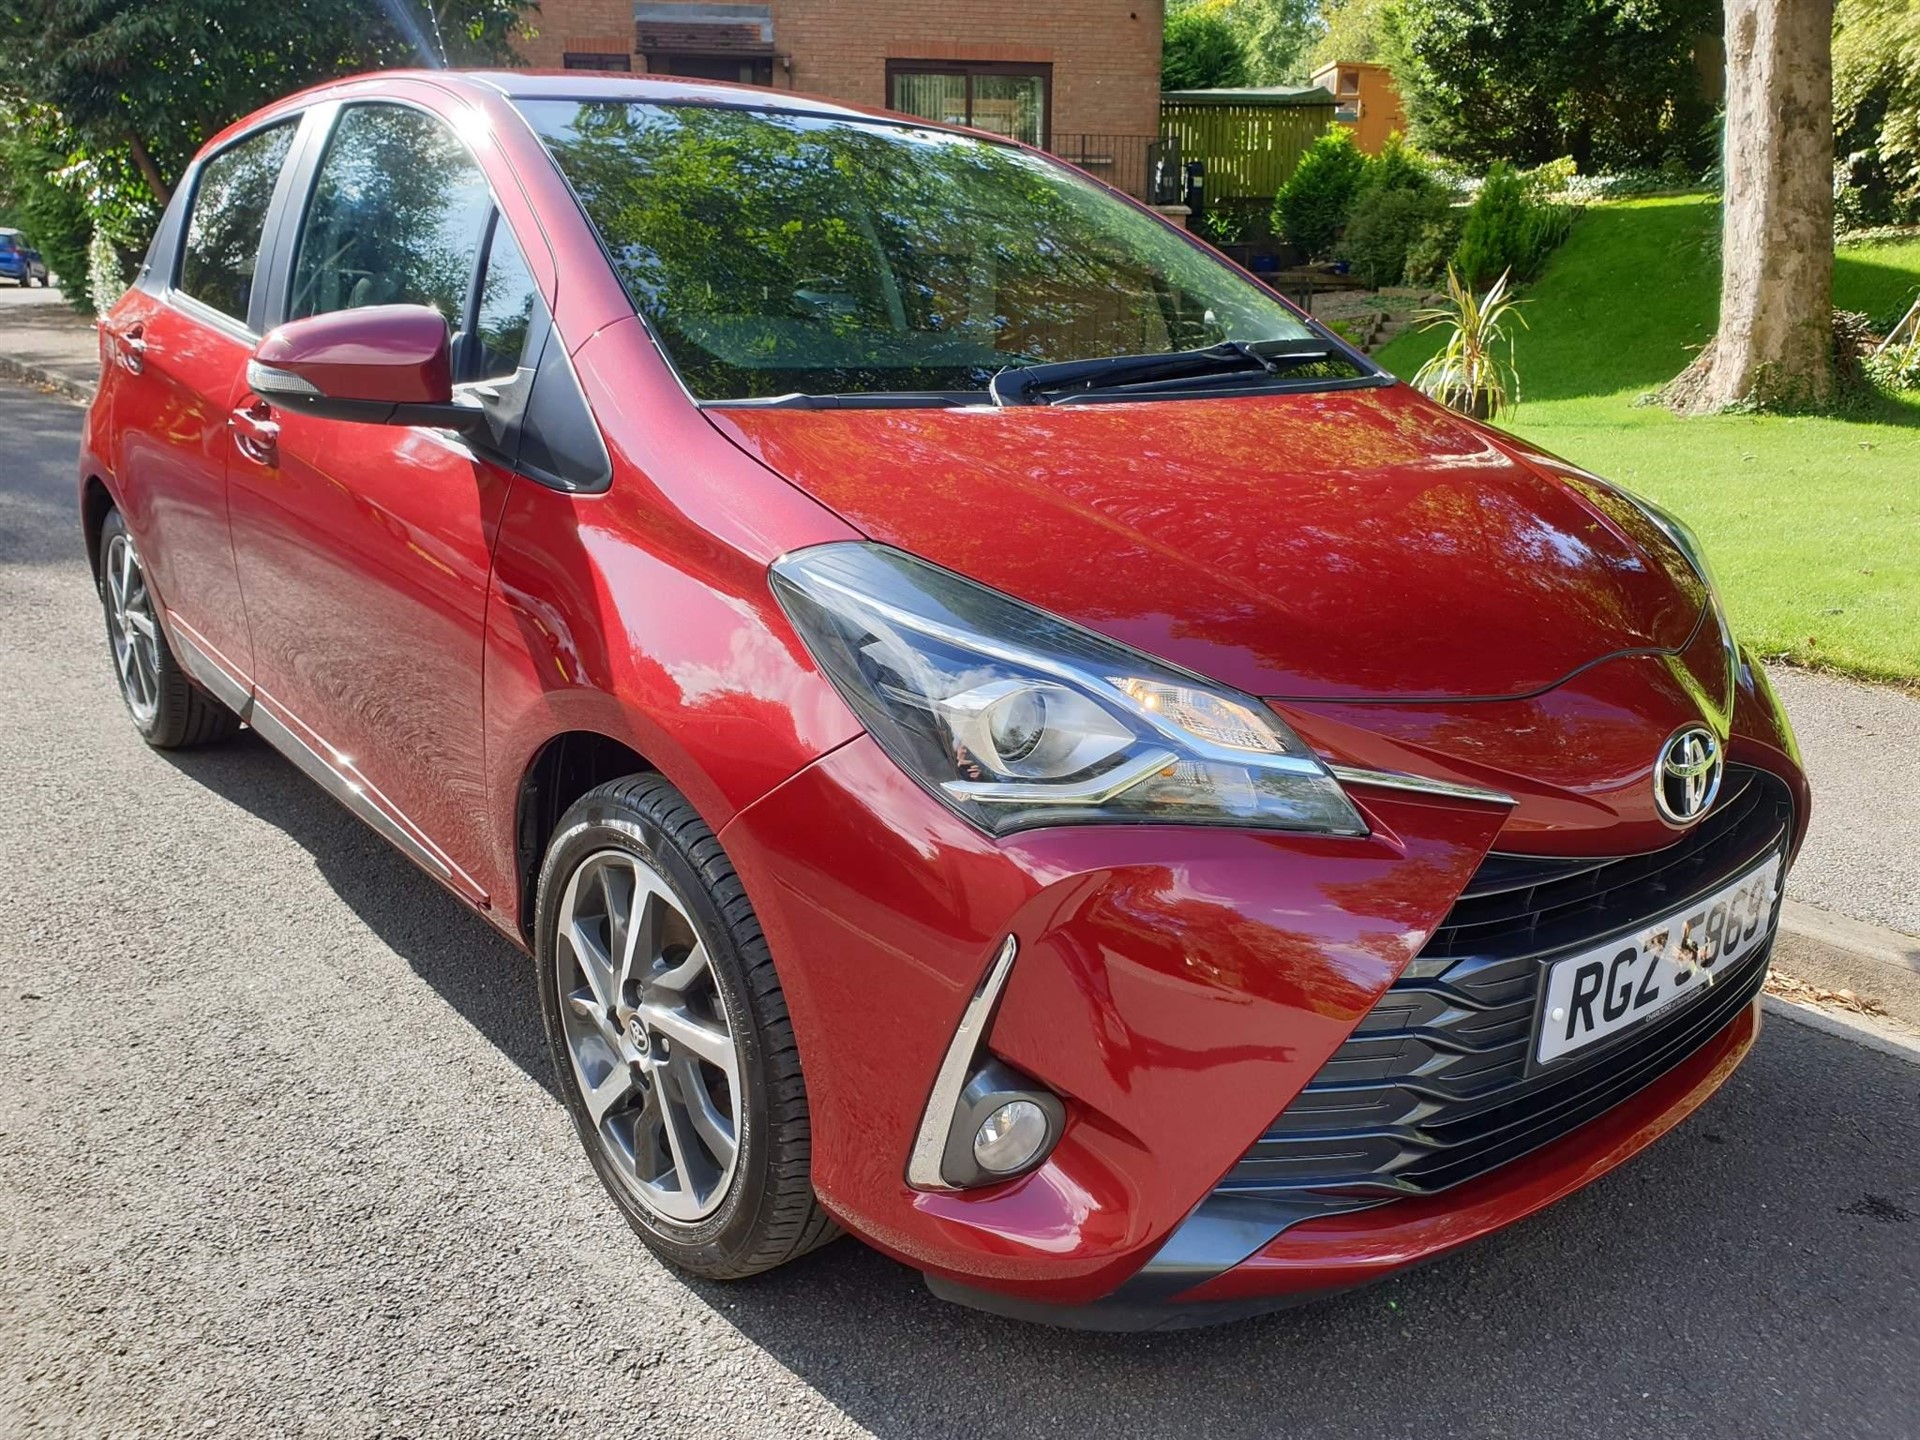 Used Toyota Yaris for sale in York, North Yorkshire